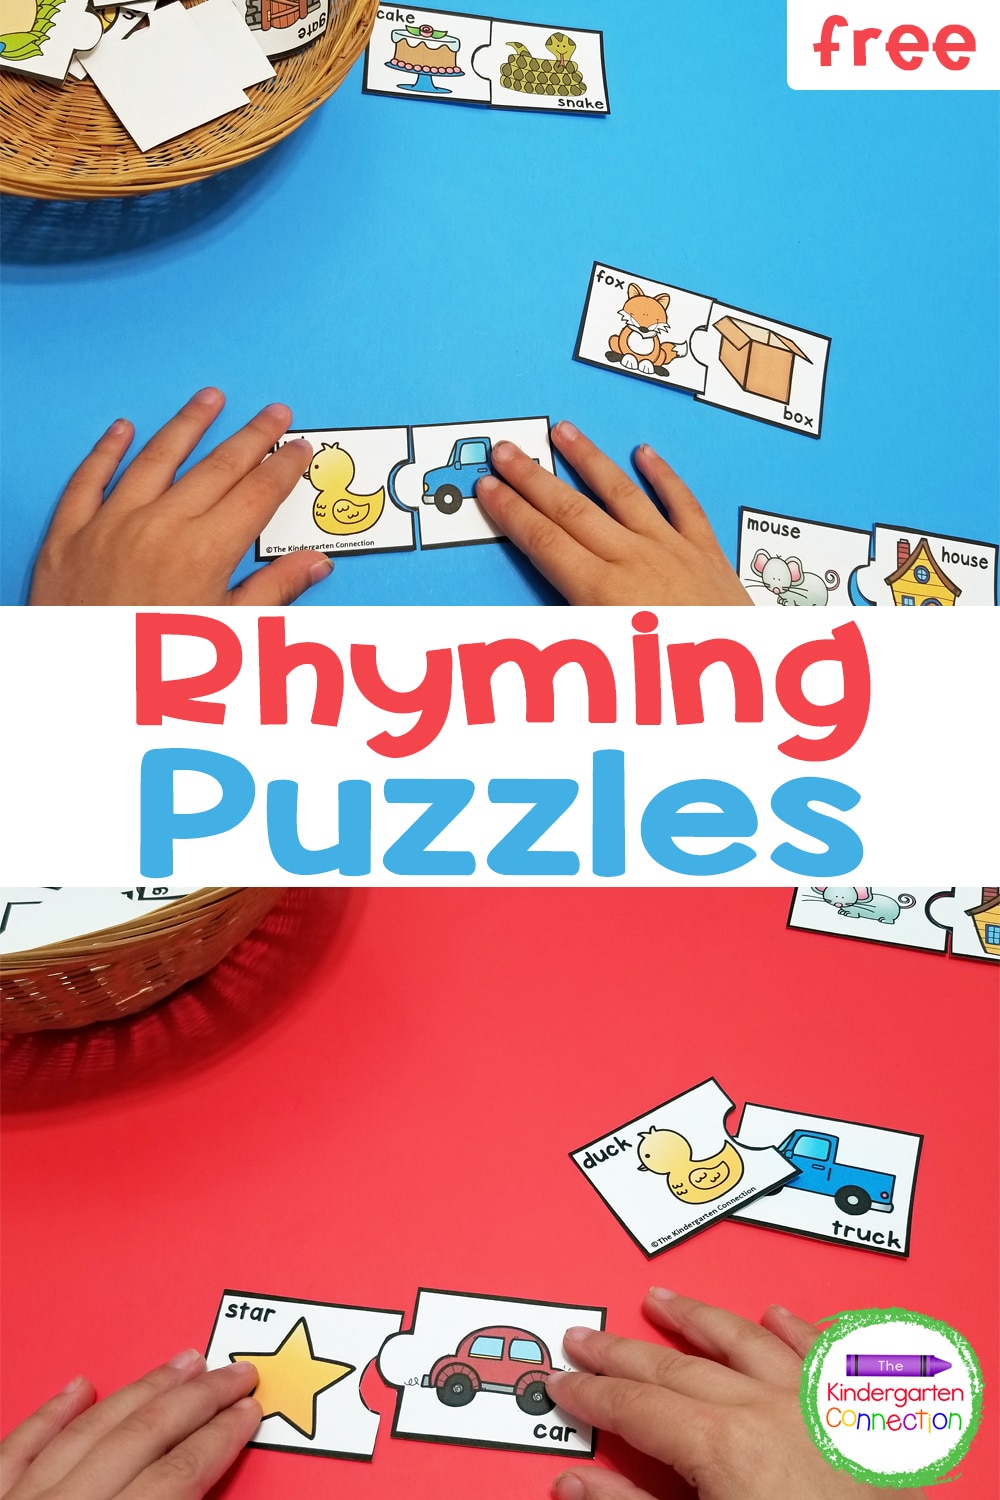 Grab these FREE printable Rhyming Puzzles for a low-prep and hands-on activity to use in your Kindergarten literacy centers or small groups!